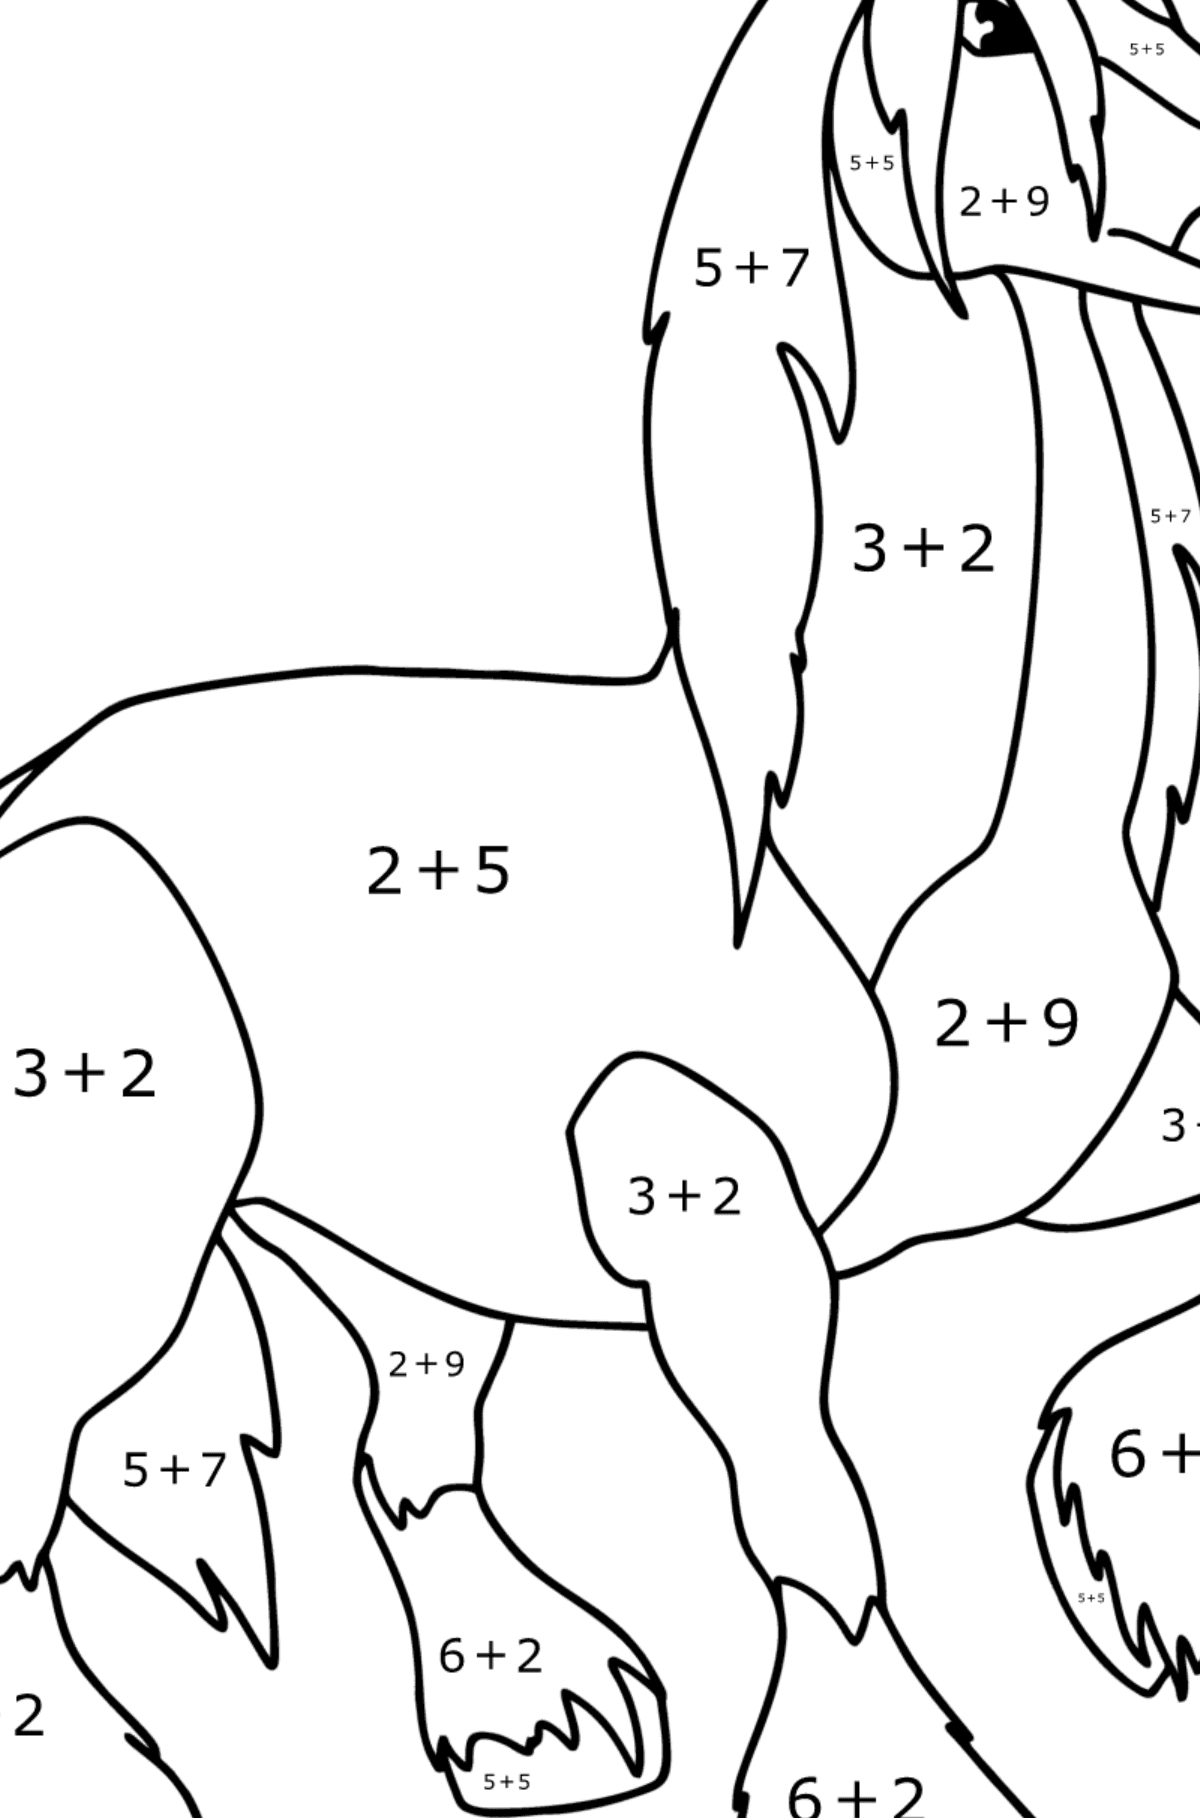 Draft horse сoloring page - Math Coloring - Addition for Kids